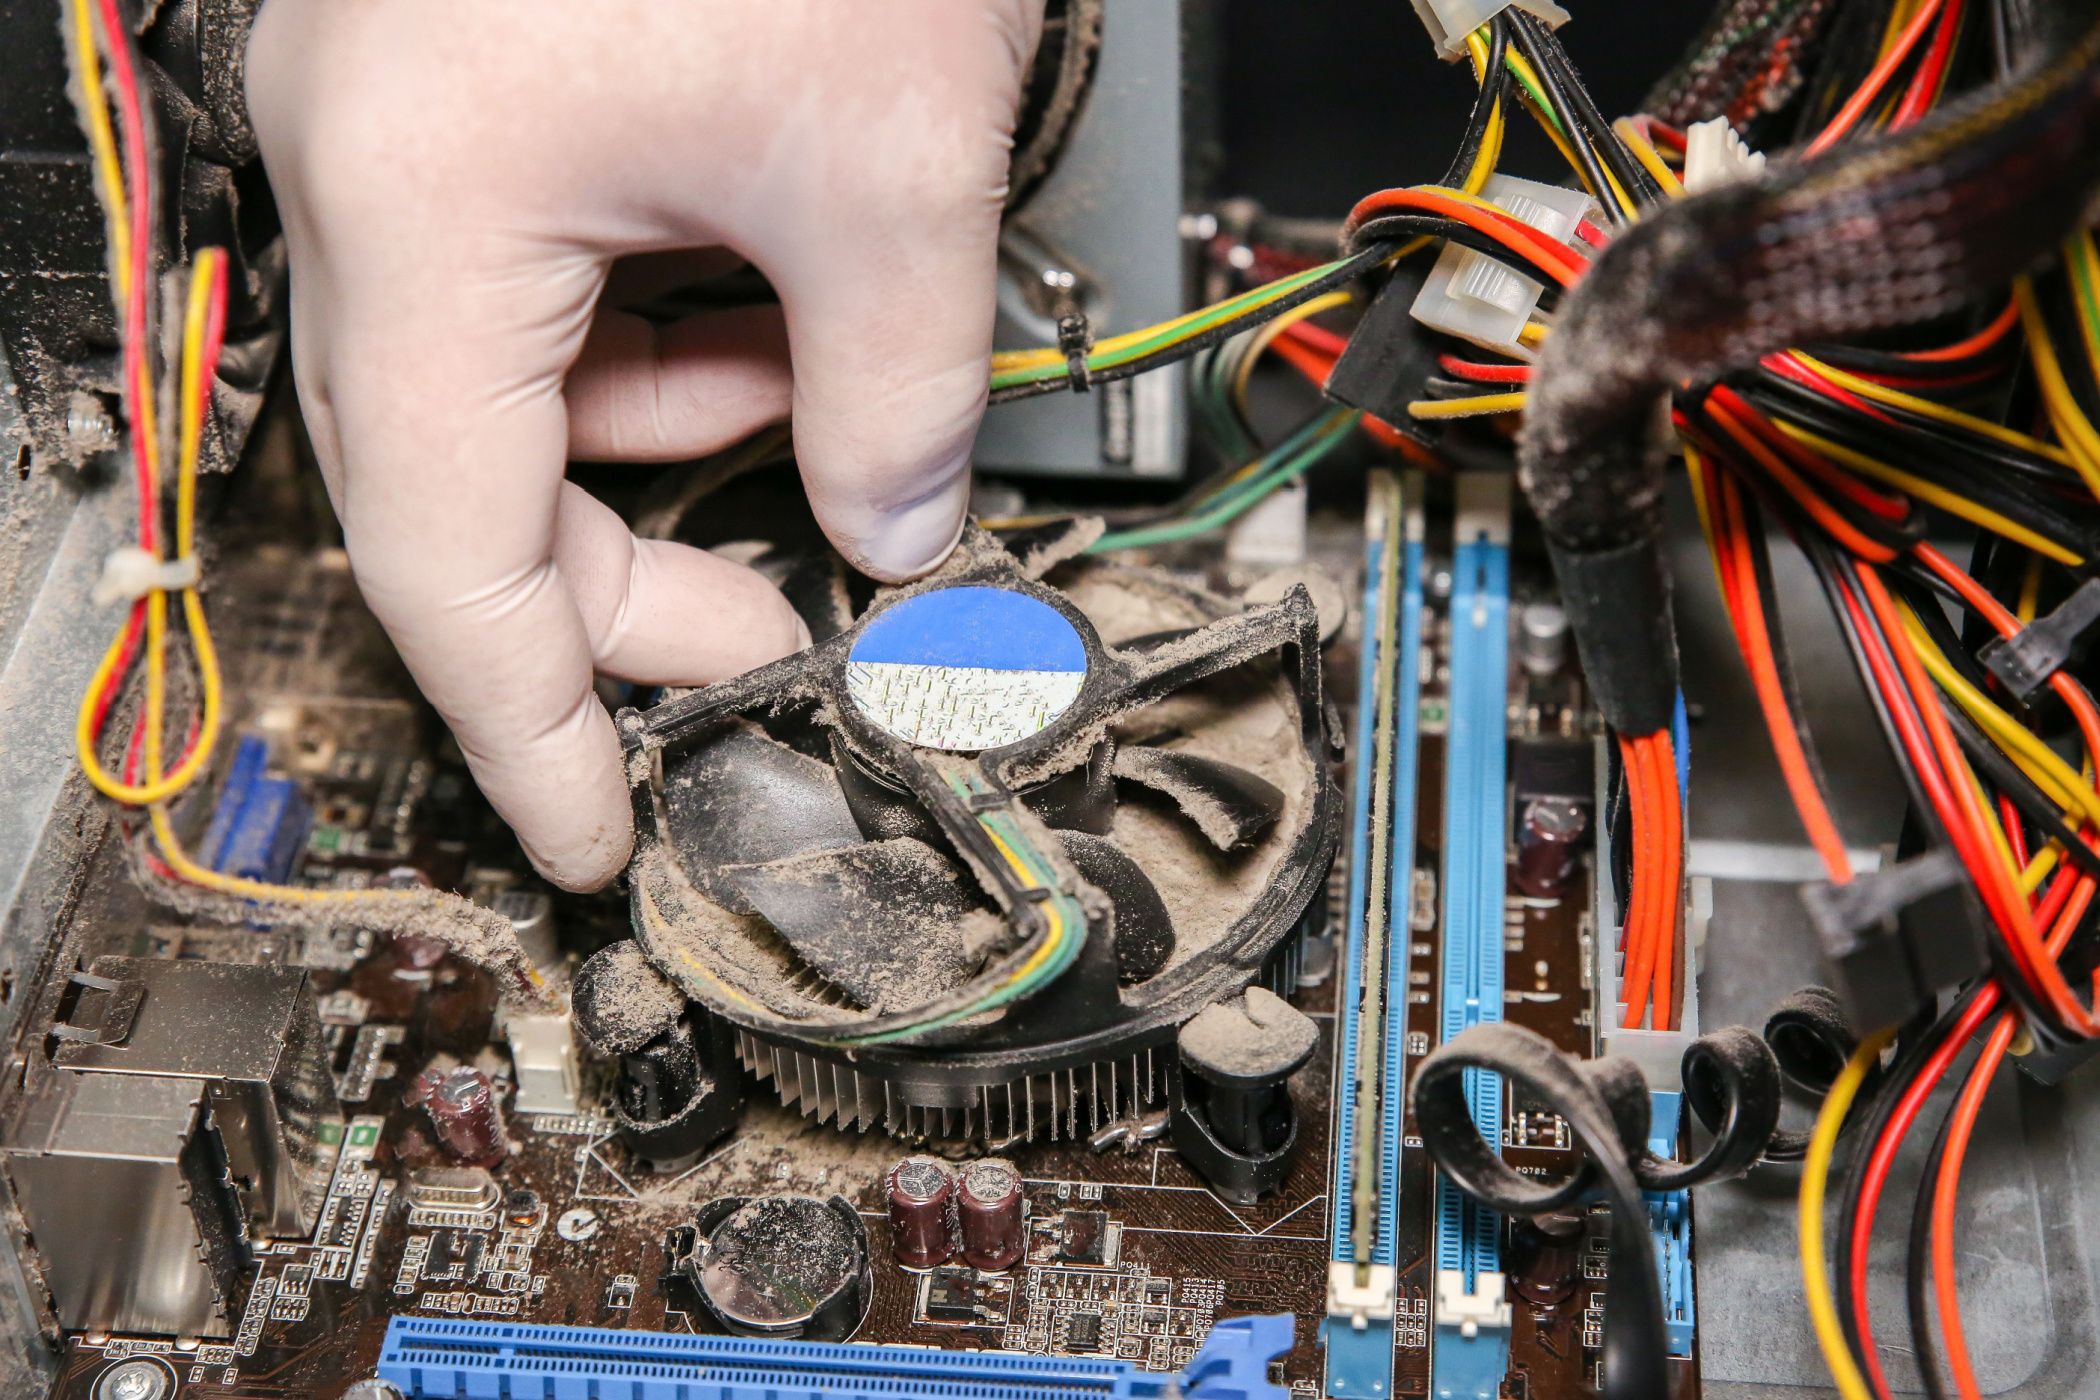 The internal components of an old, dusty computer.